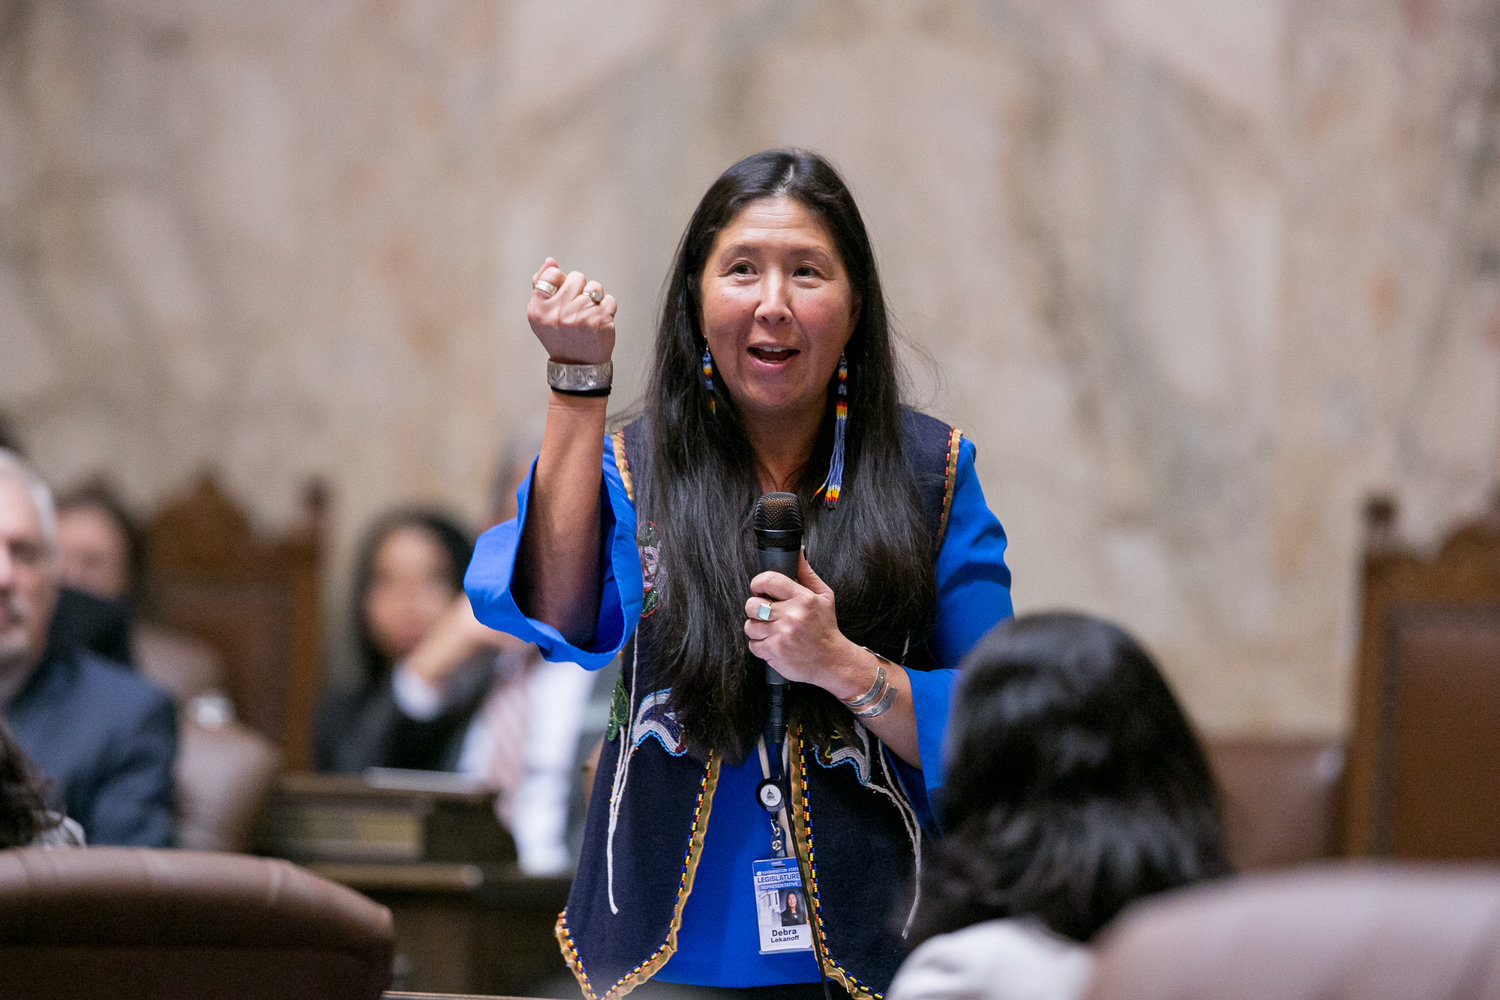 Debra Lekanoff is the only Native American in the Washington State Legislature, and she feels the weight of clearing the way for others to follow.